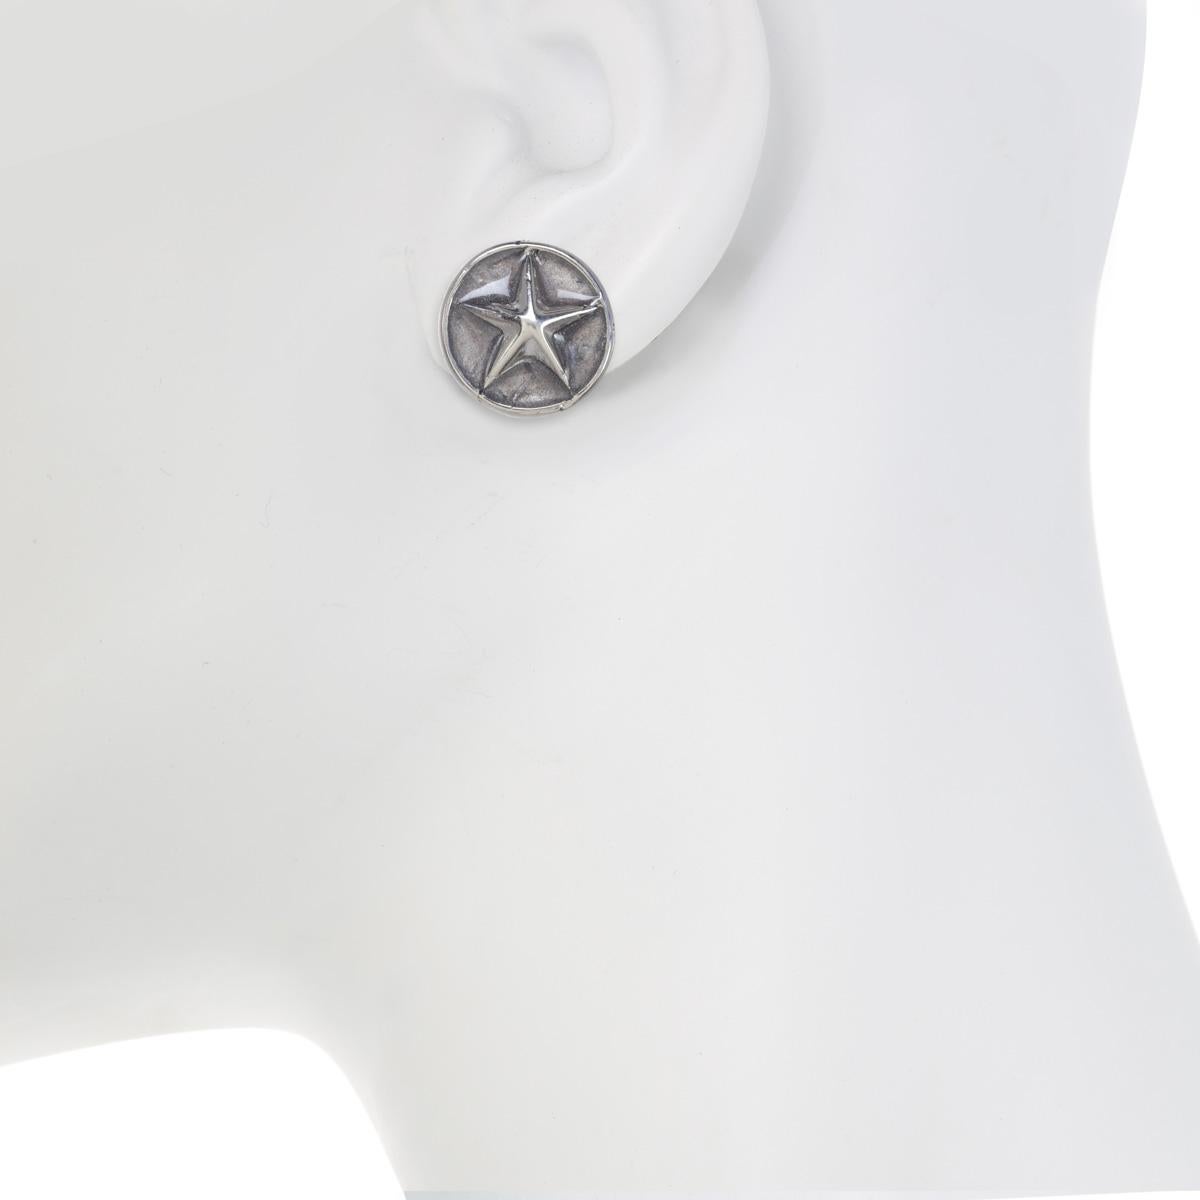 Contemporary His and Her Lonestar Cuff Links and Earrings in Rhodium For Sale